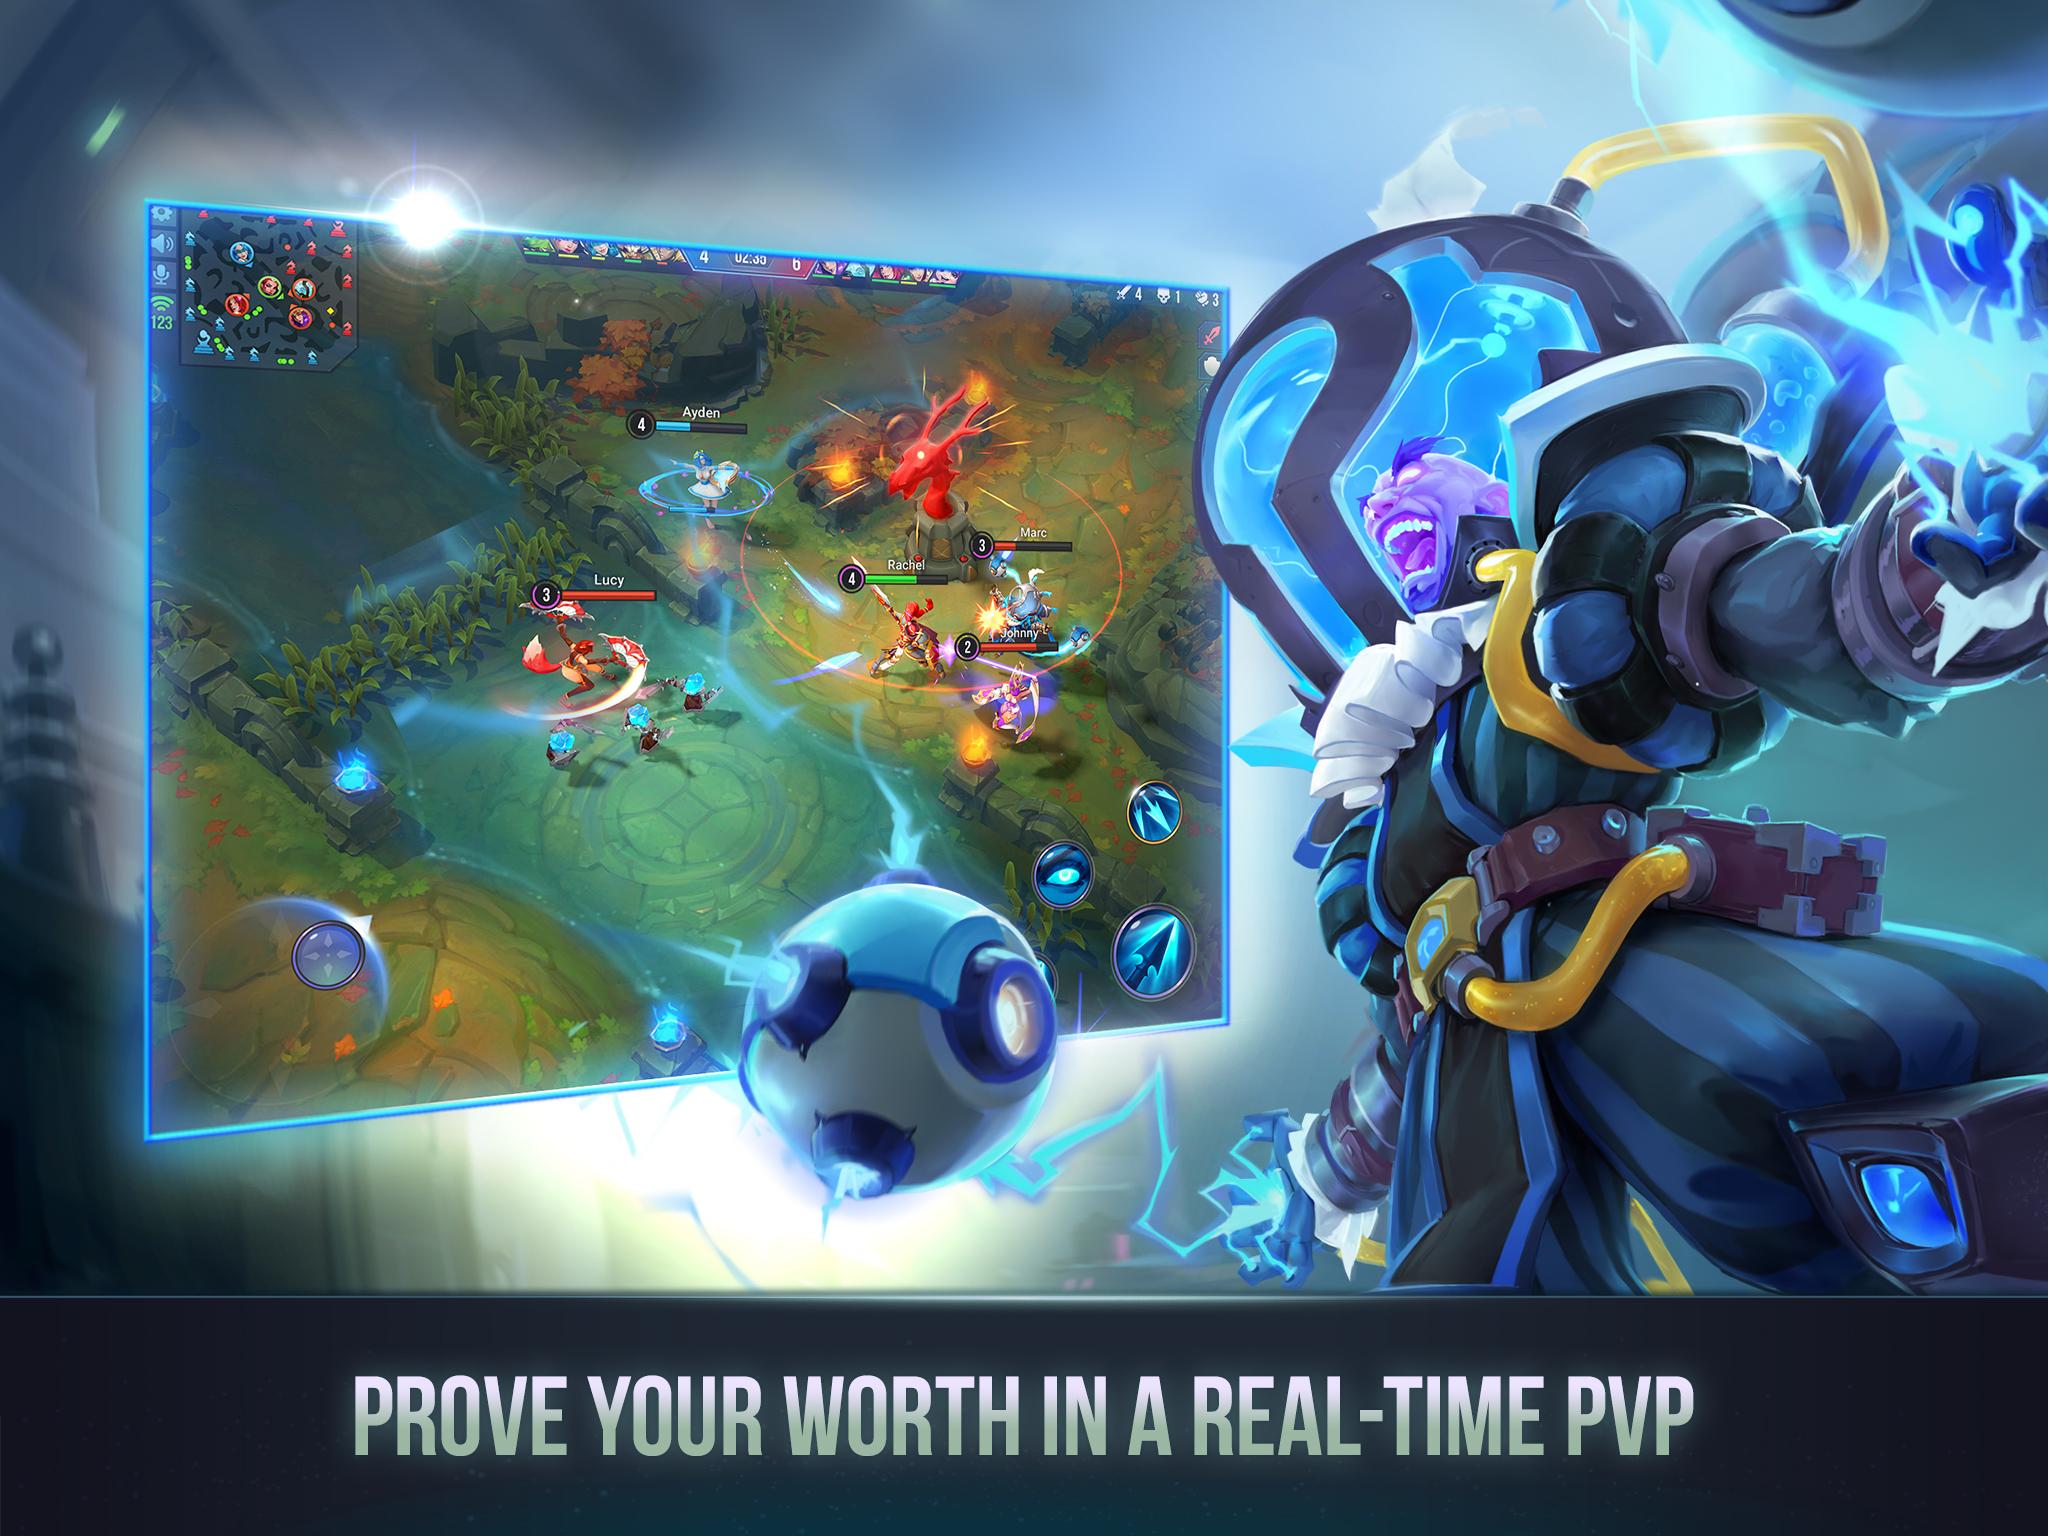 Download Dungeon Hunter Champions on PC with BlueStacks